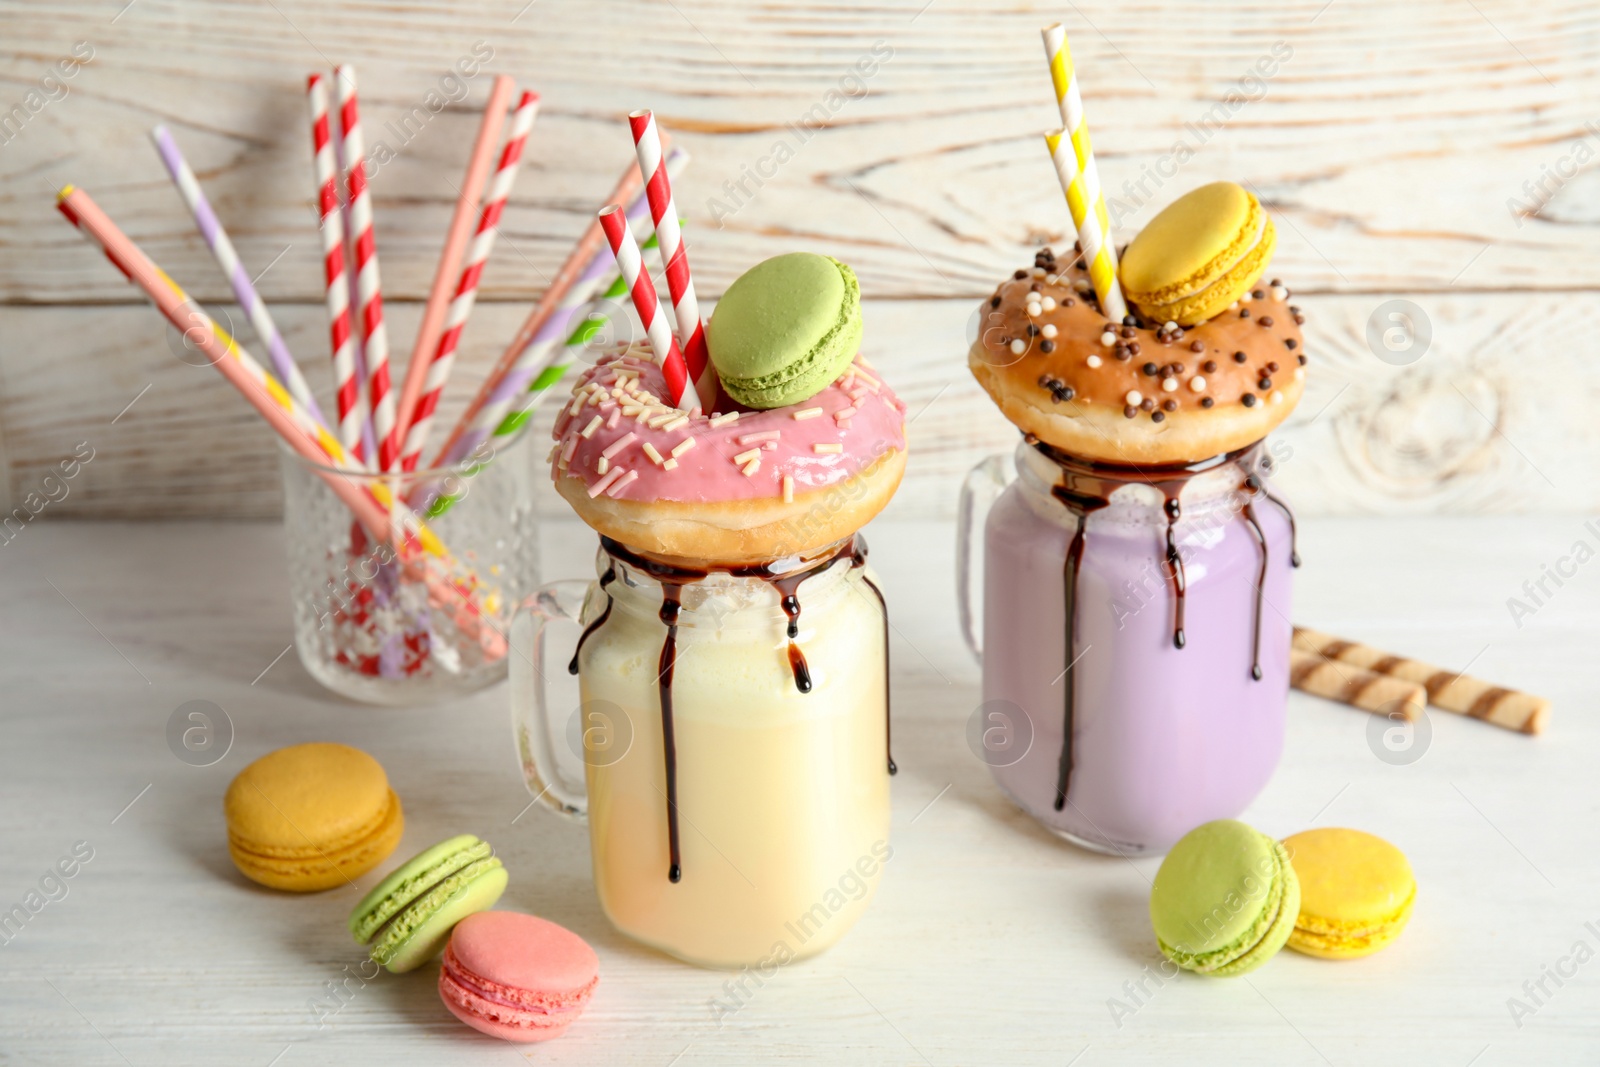 Photo of Mason jars with delicious milk shakes and macaroons on table